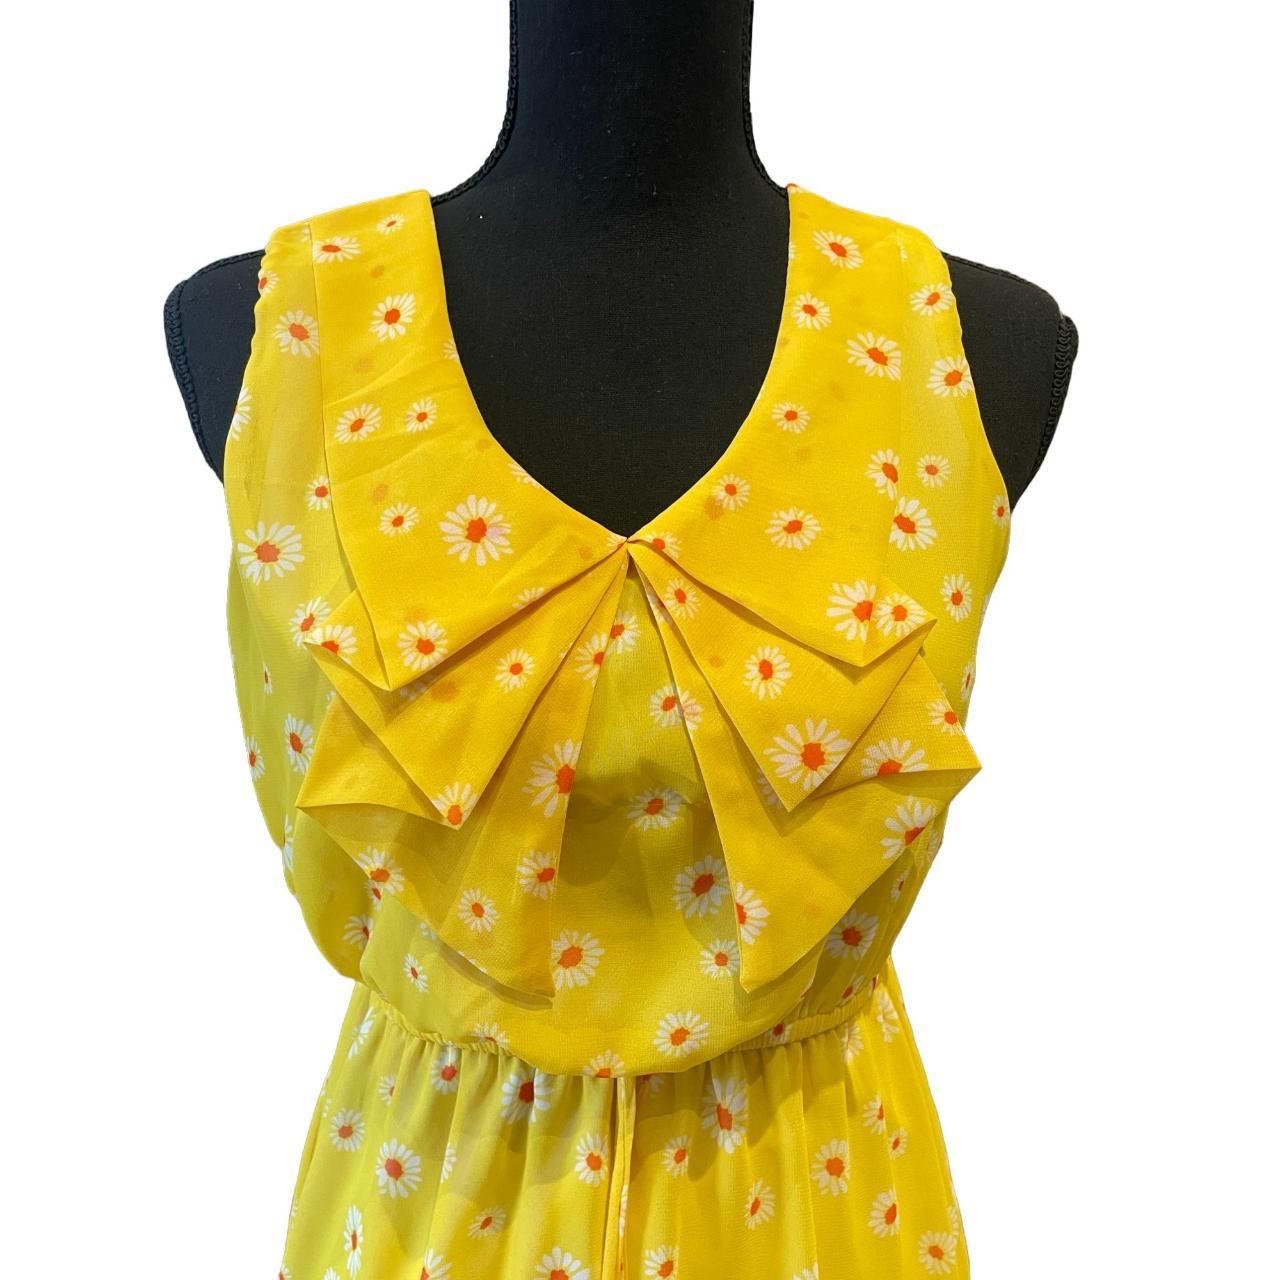 Product Image 2 - Brand: Sweet Storm
Style: Sleeveless fit